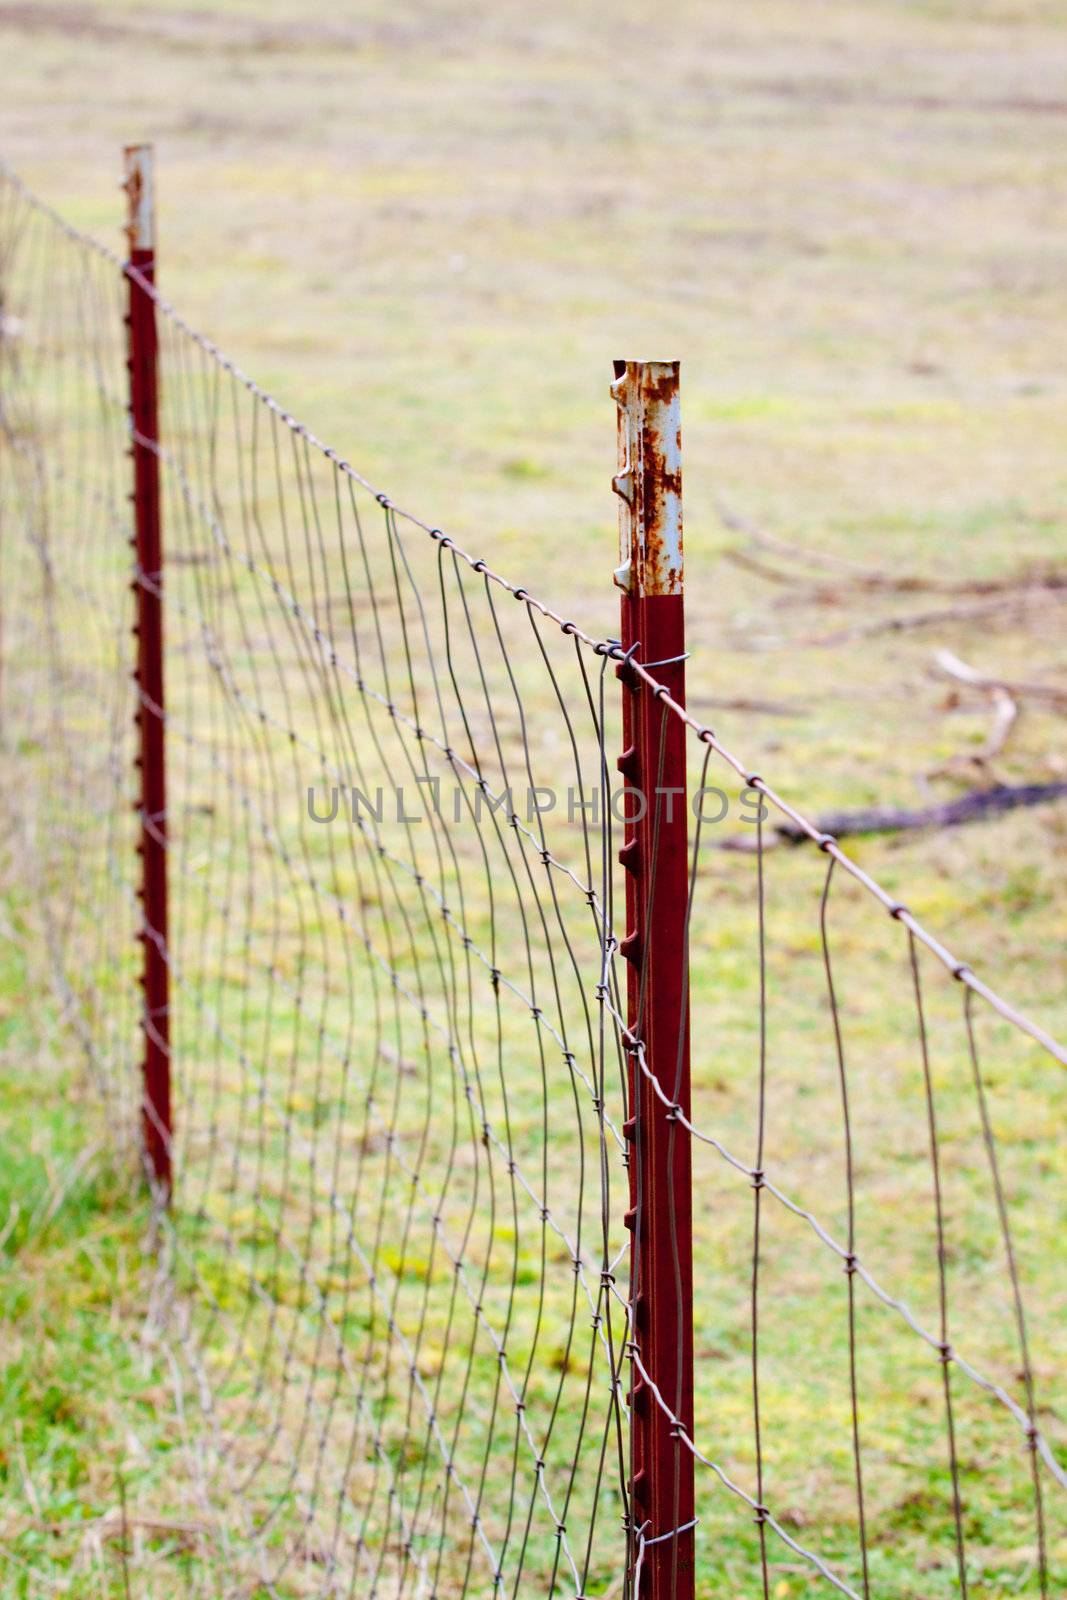 Field fencing posts with wire fence in a field on a farm ranch.